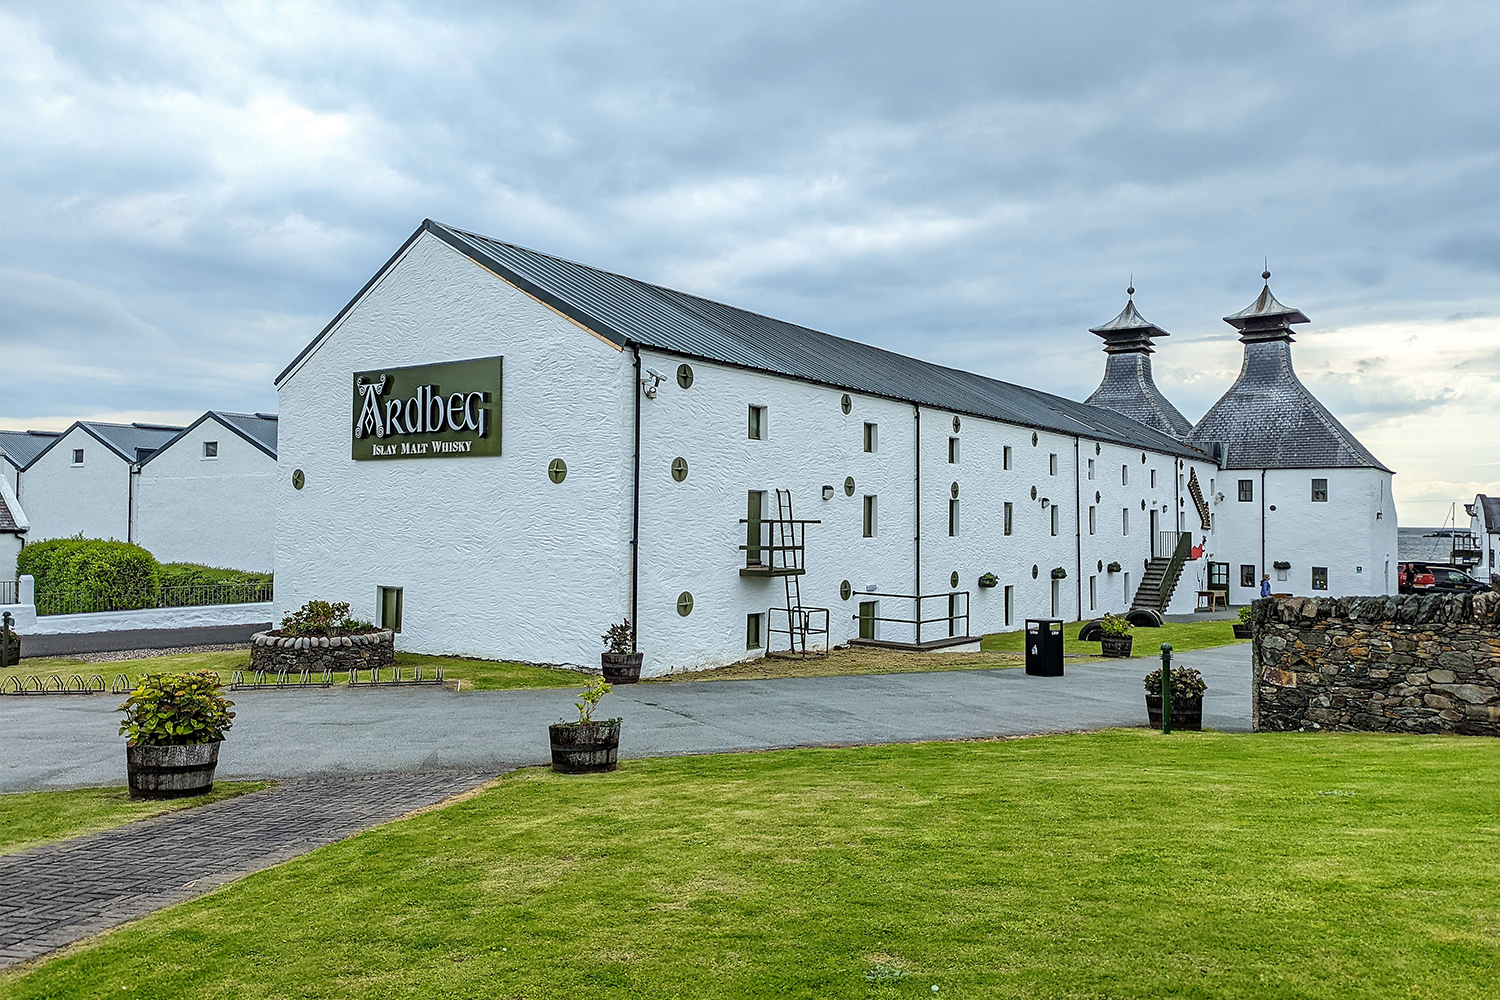 A white building that is part of the Ardbeg Scotch Whiskey Distillery on the Isle of Islay, Scotland